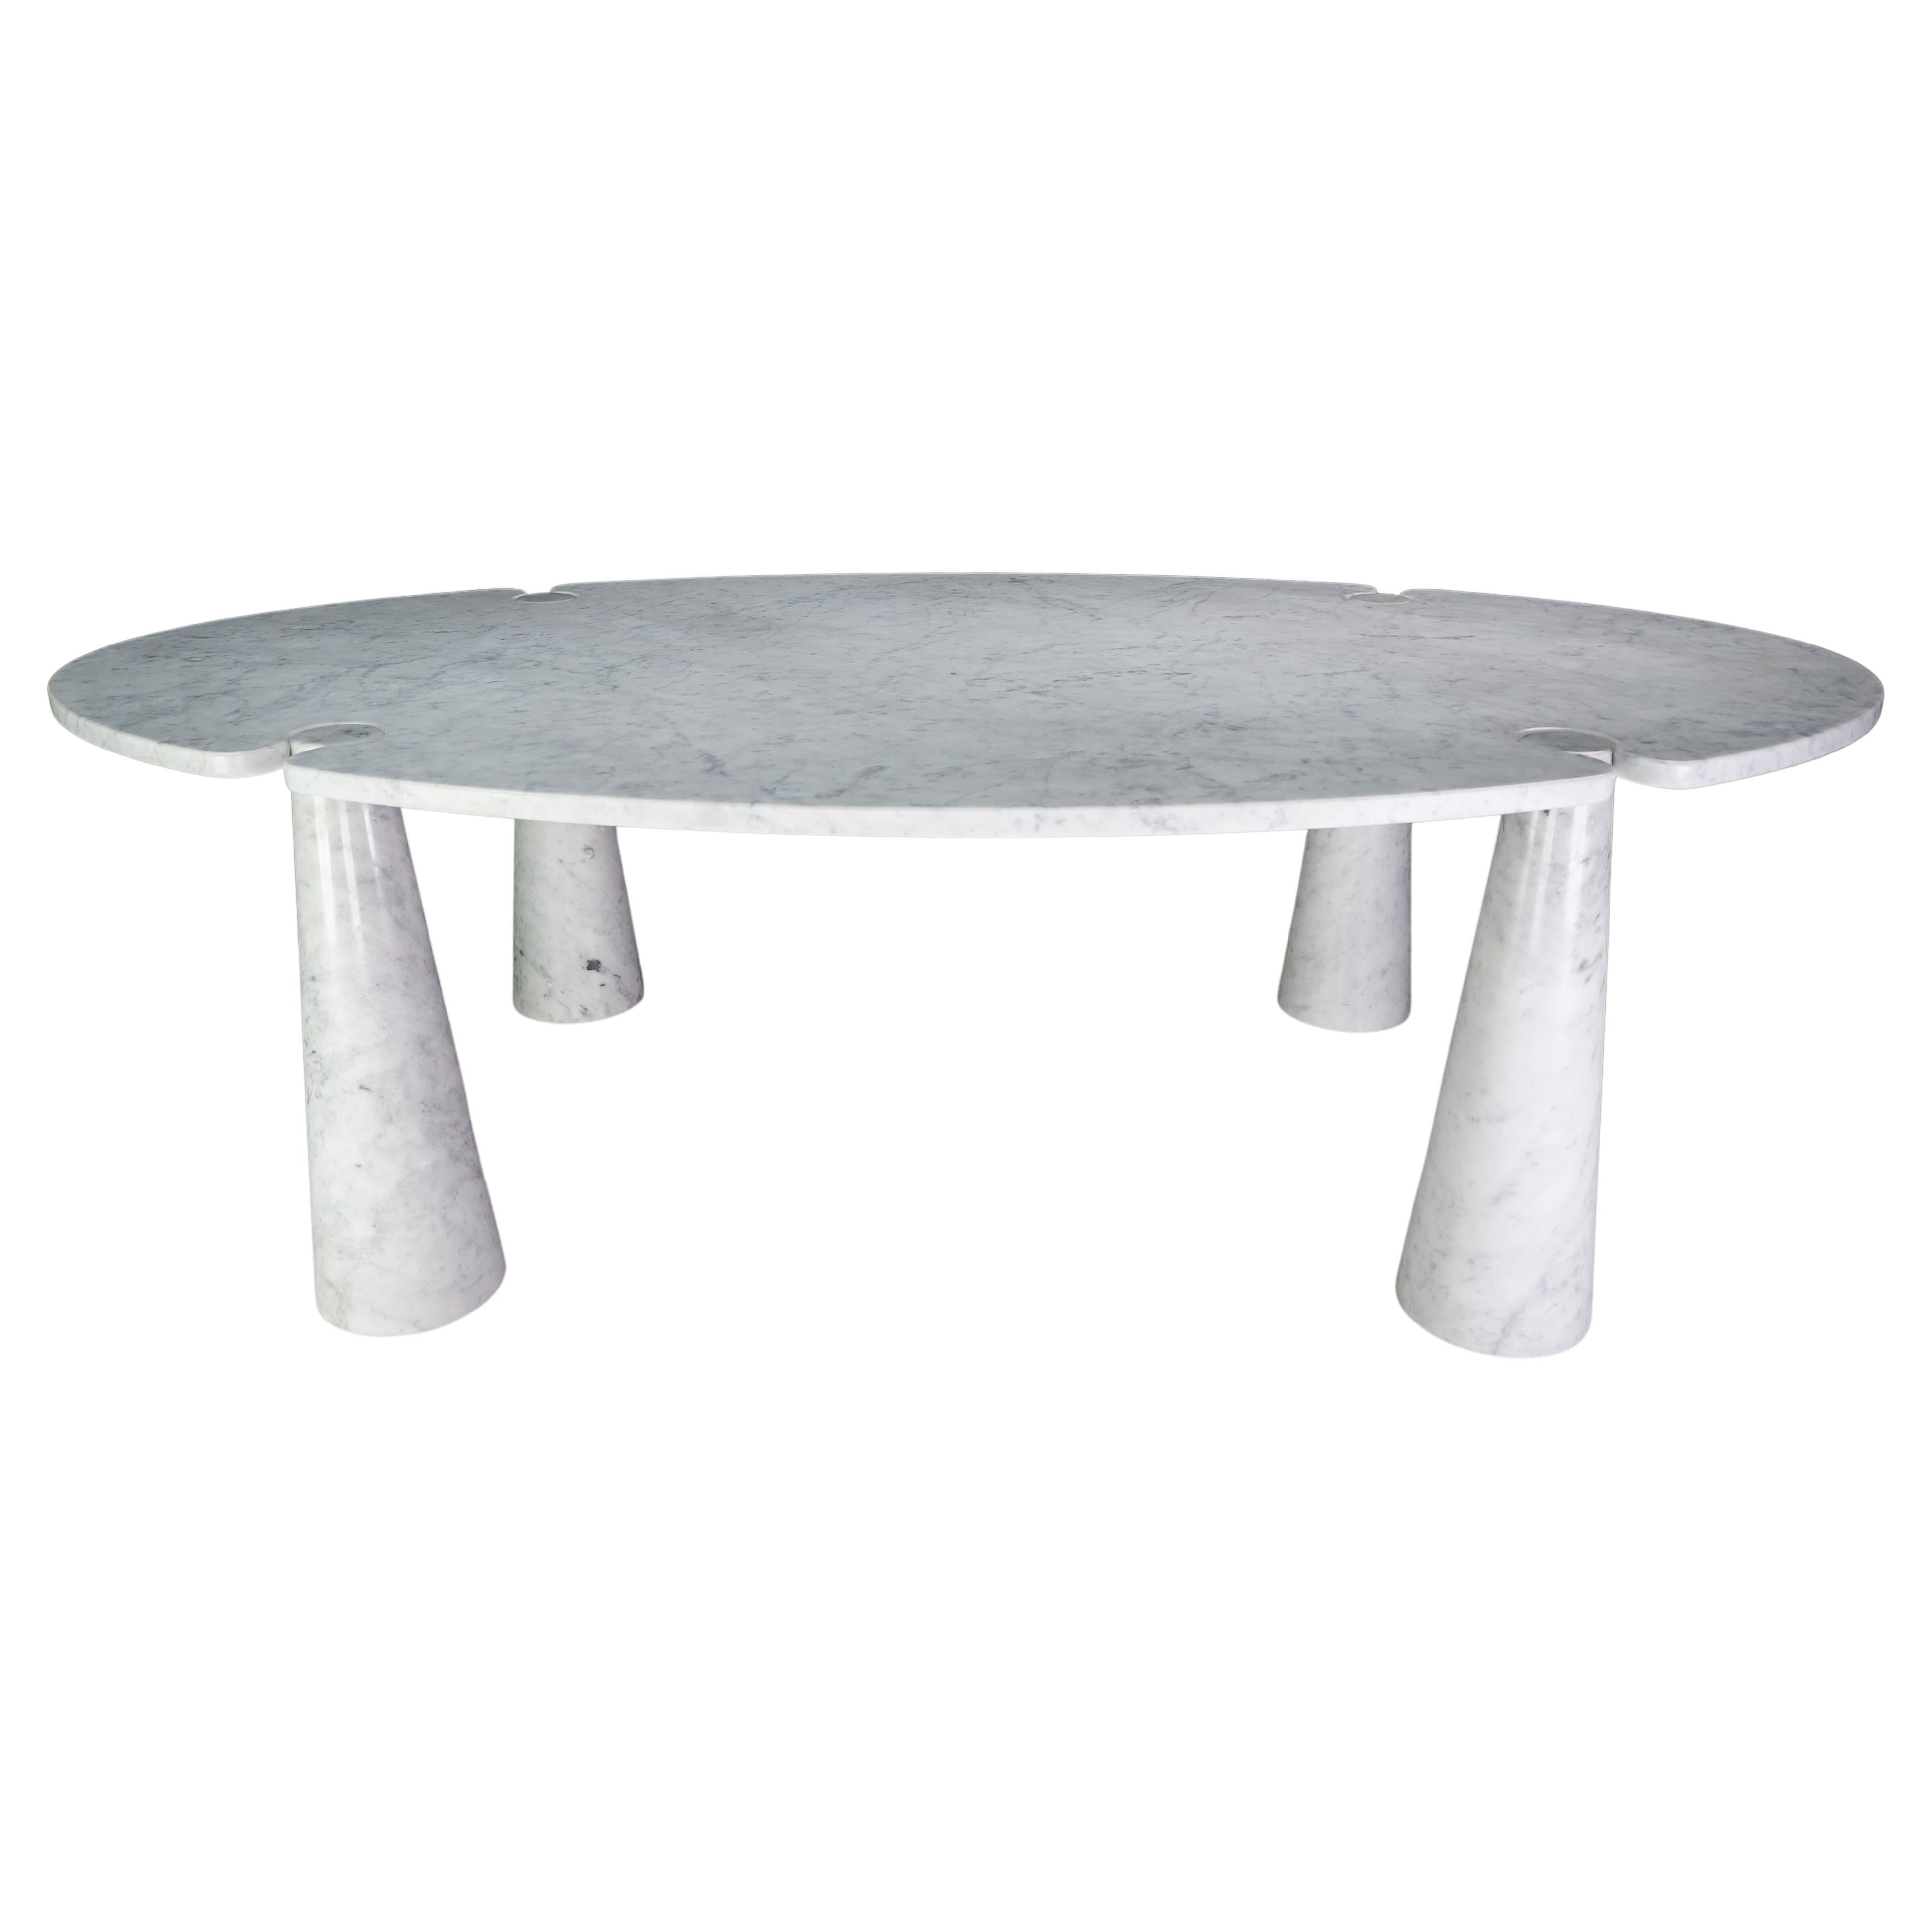 Angelo Mangiarotti for Skipper White Carrara Marble "Eros" Dining Table 1970 For Sale